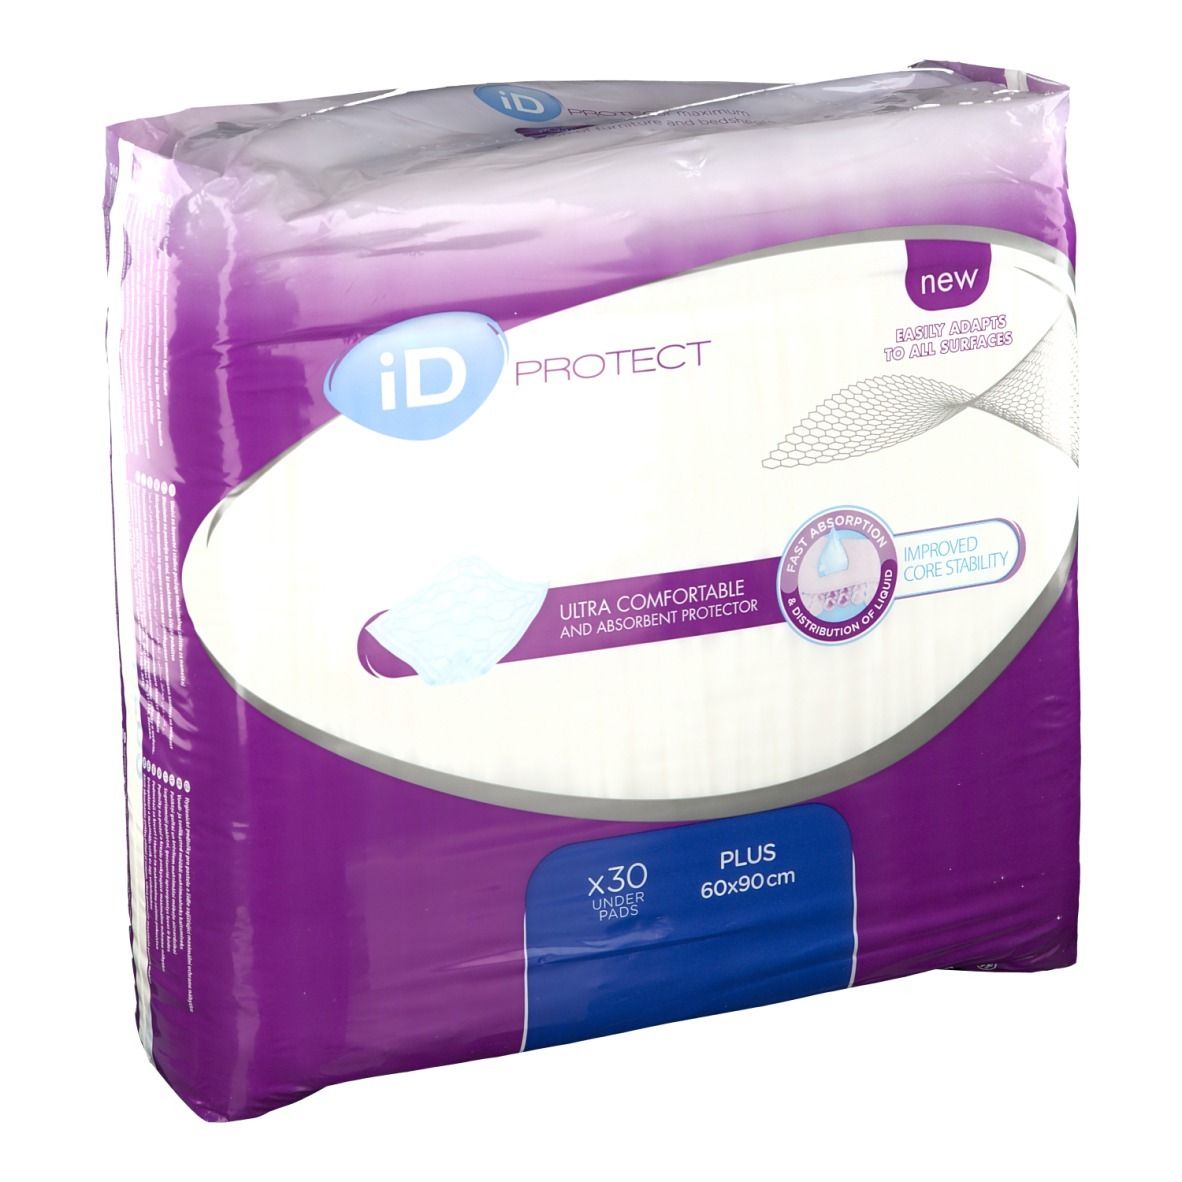 Image of iD EXPERT PROTECT Plus 60 x 90 cm